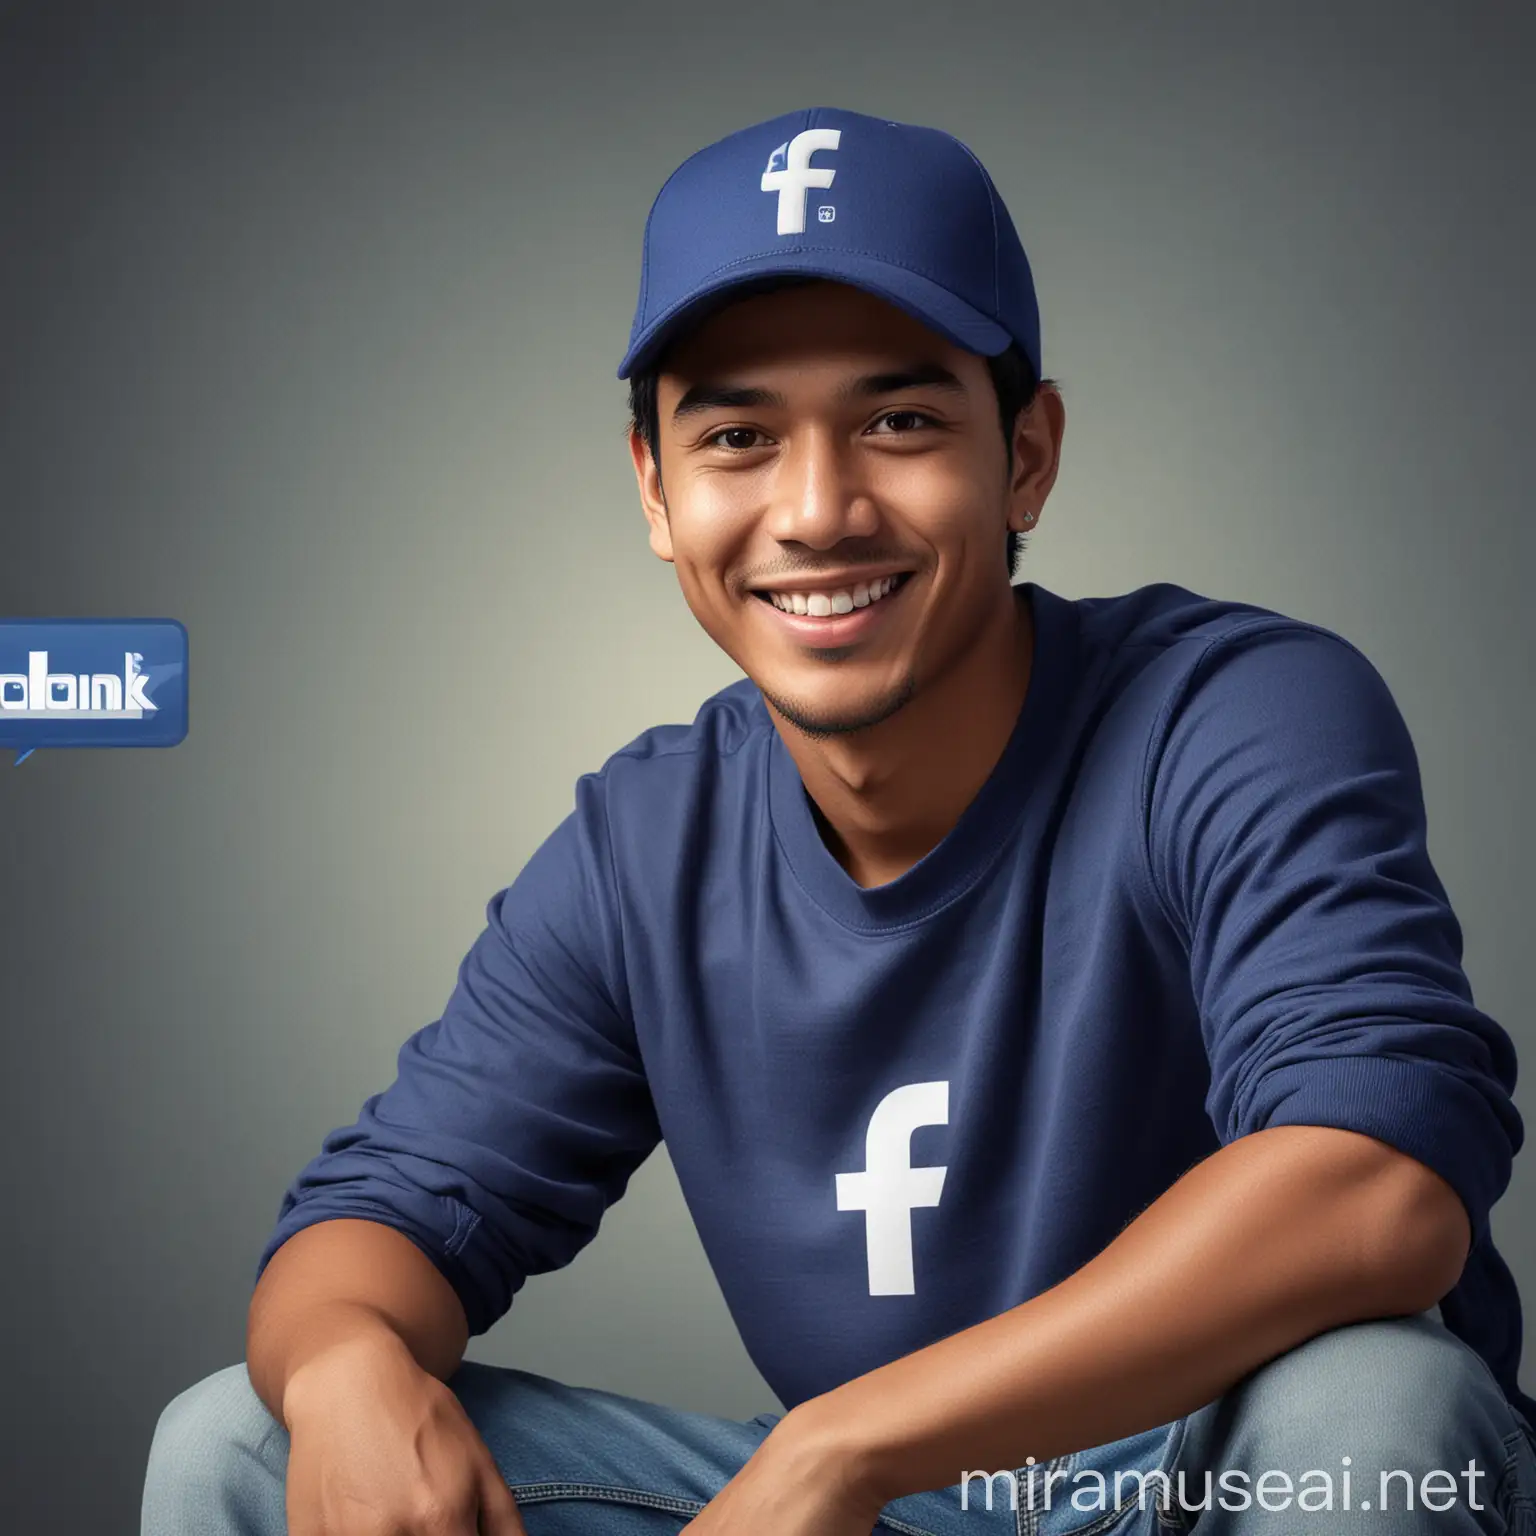 Friendly Indonesian Young Man with Facebook Profile Smiling in Blue Sweater